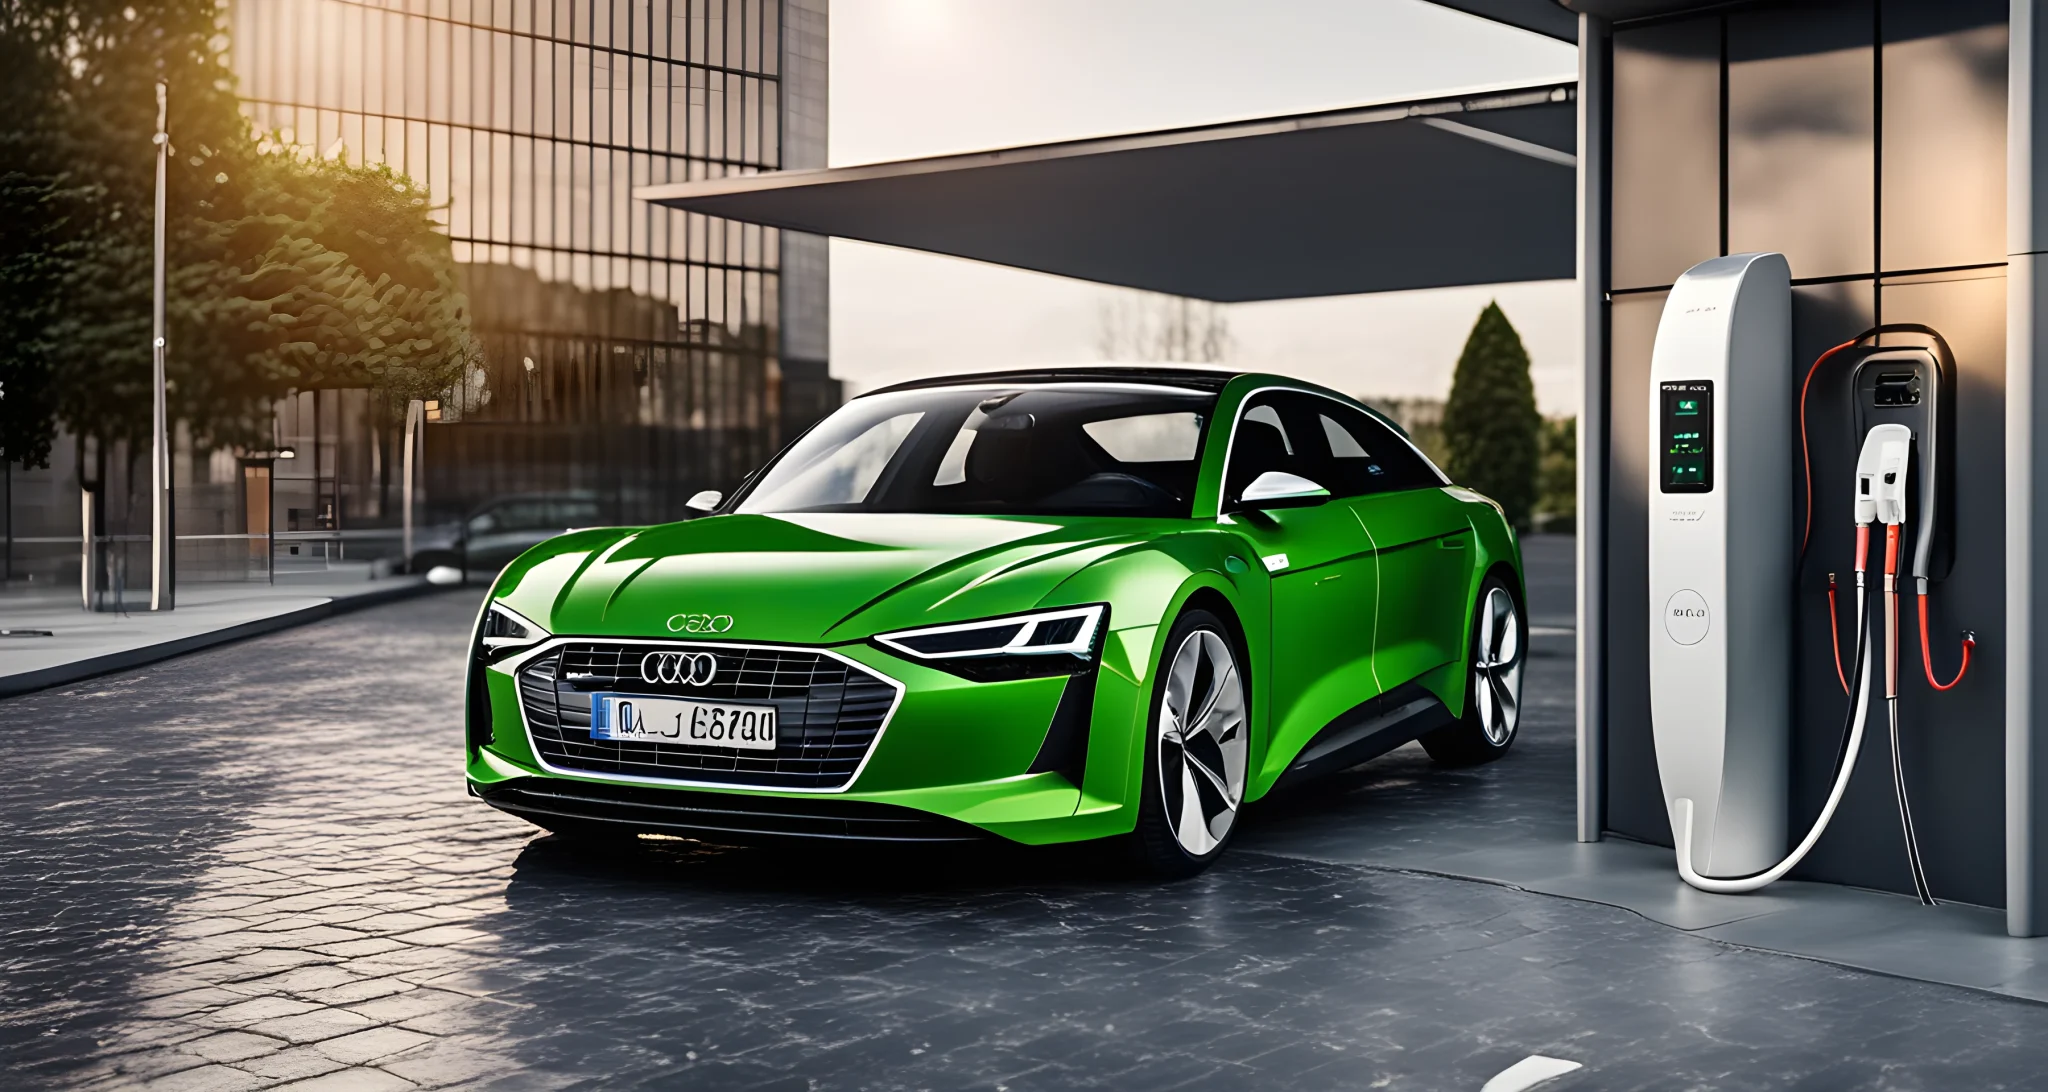 The image shows an electric Audi car parked in front of a charging station with solar panels on the roof.